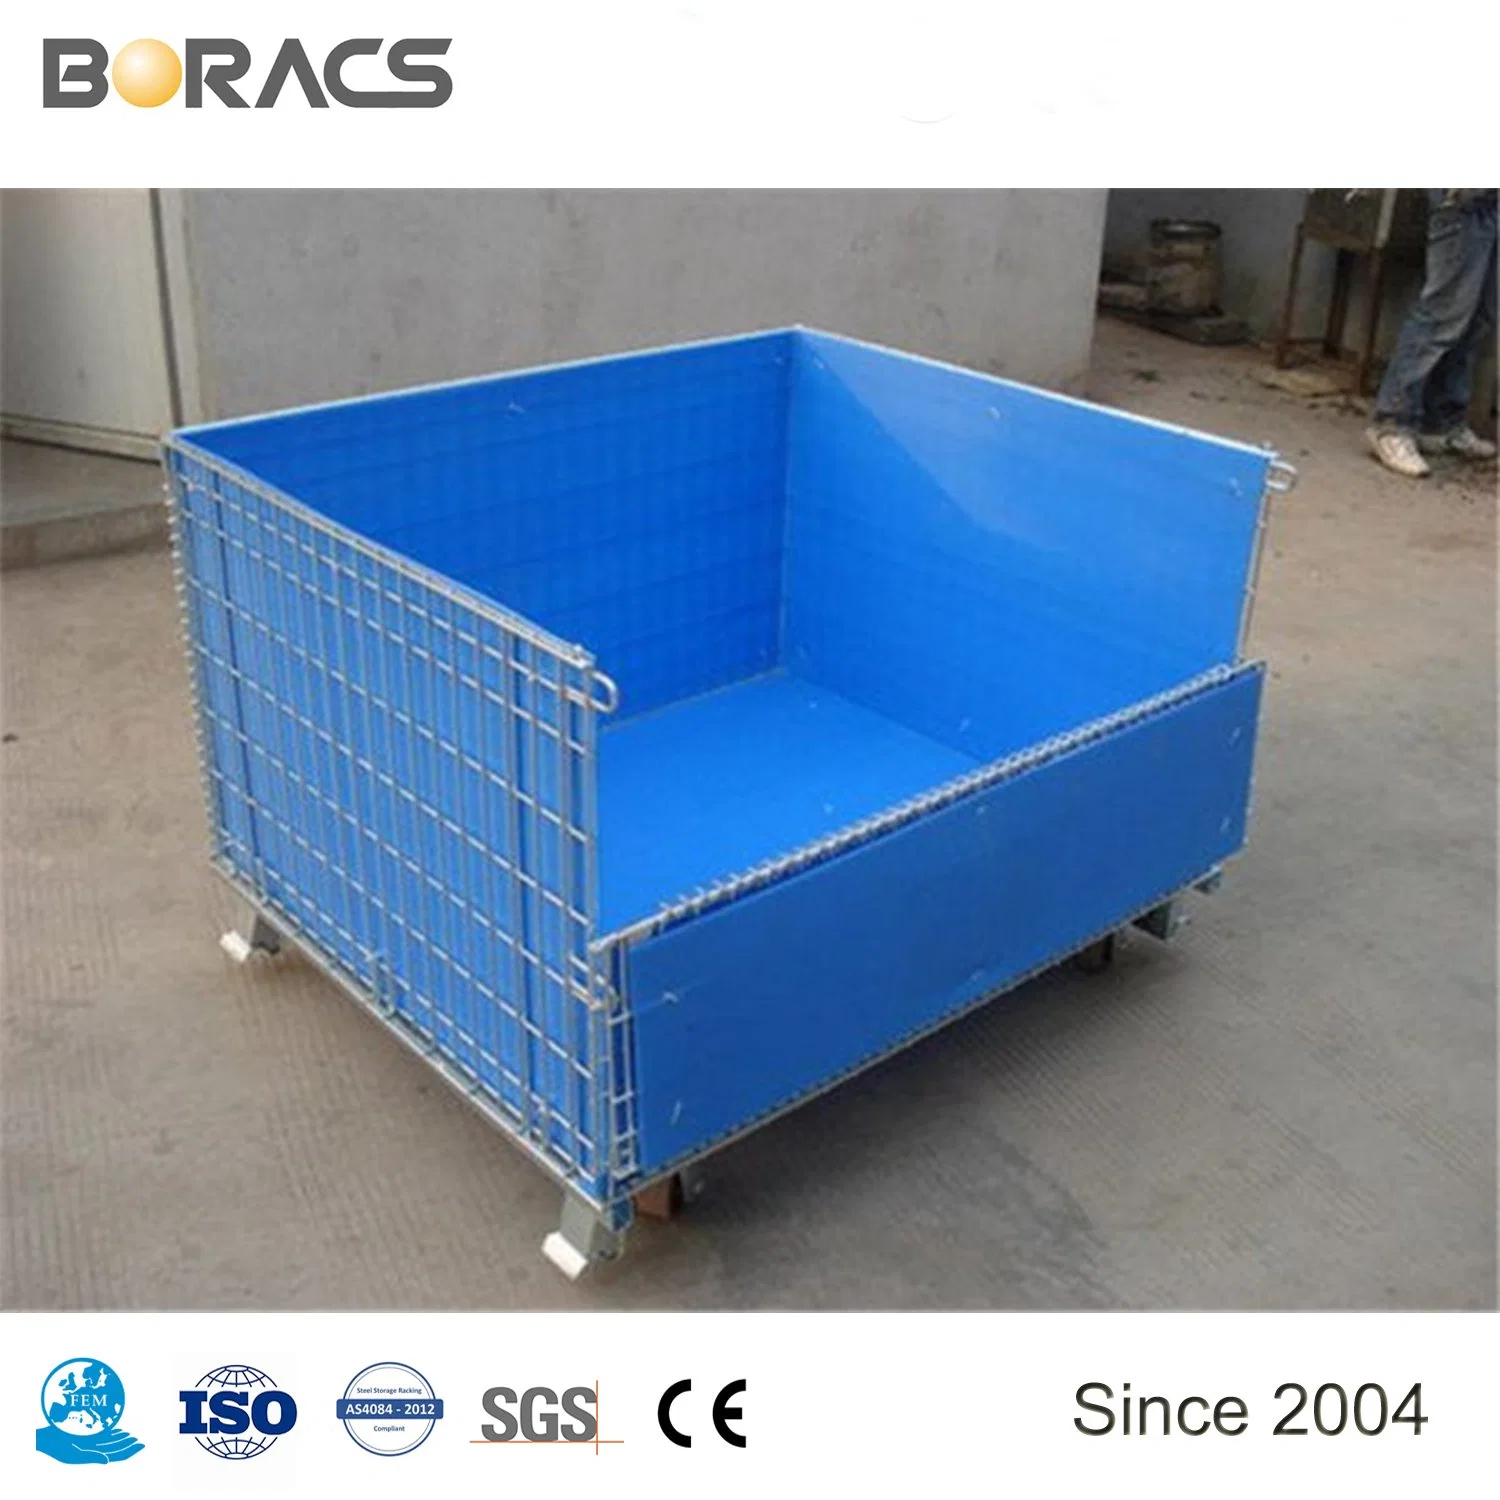 Heavy Duty Adjustable Seclective Stackable Wire Mesh Container for Warehouse Storage